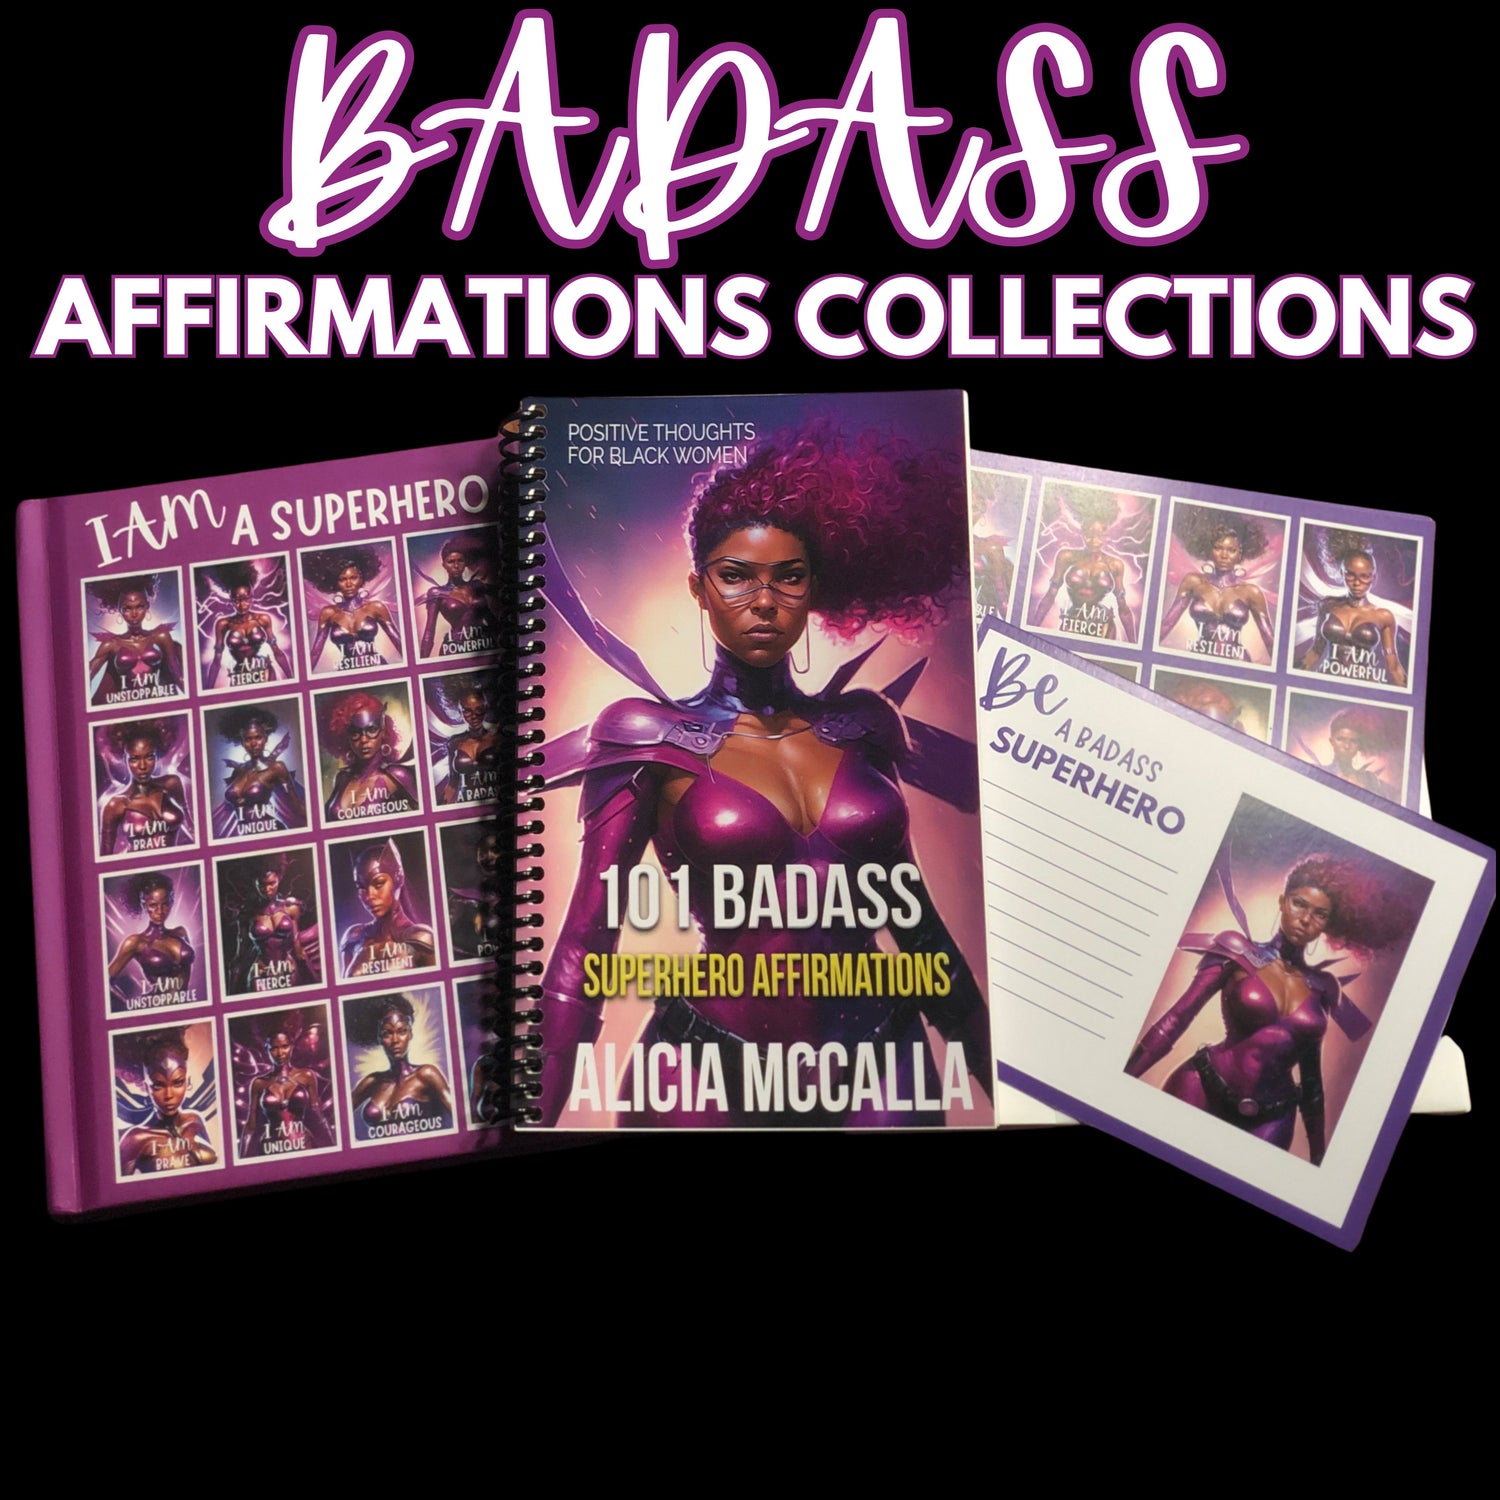 Collection items to support the Affirmations Practice